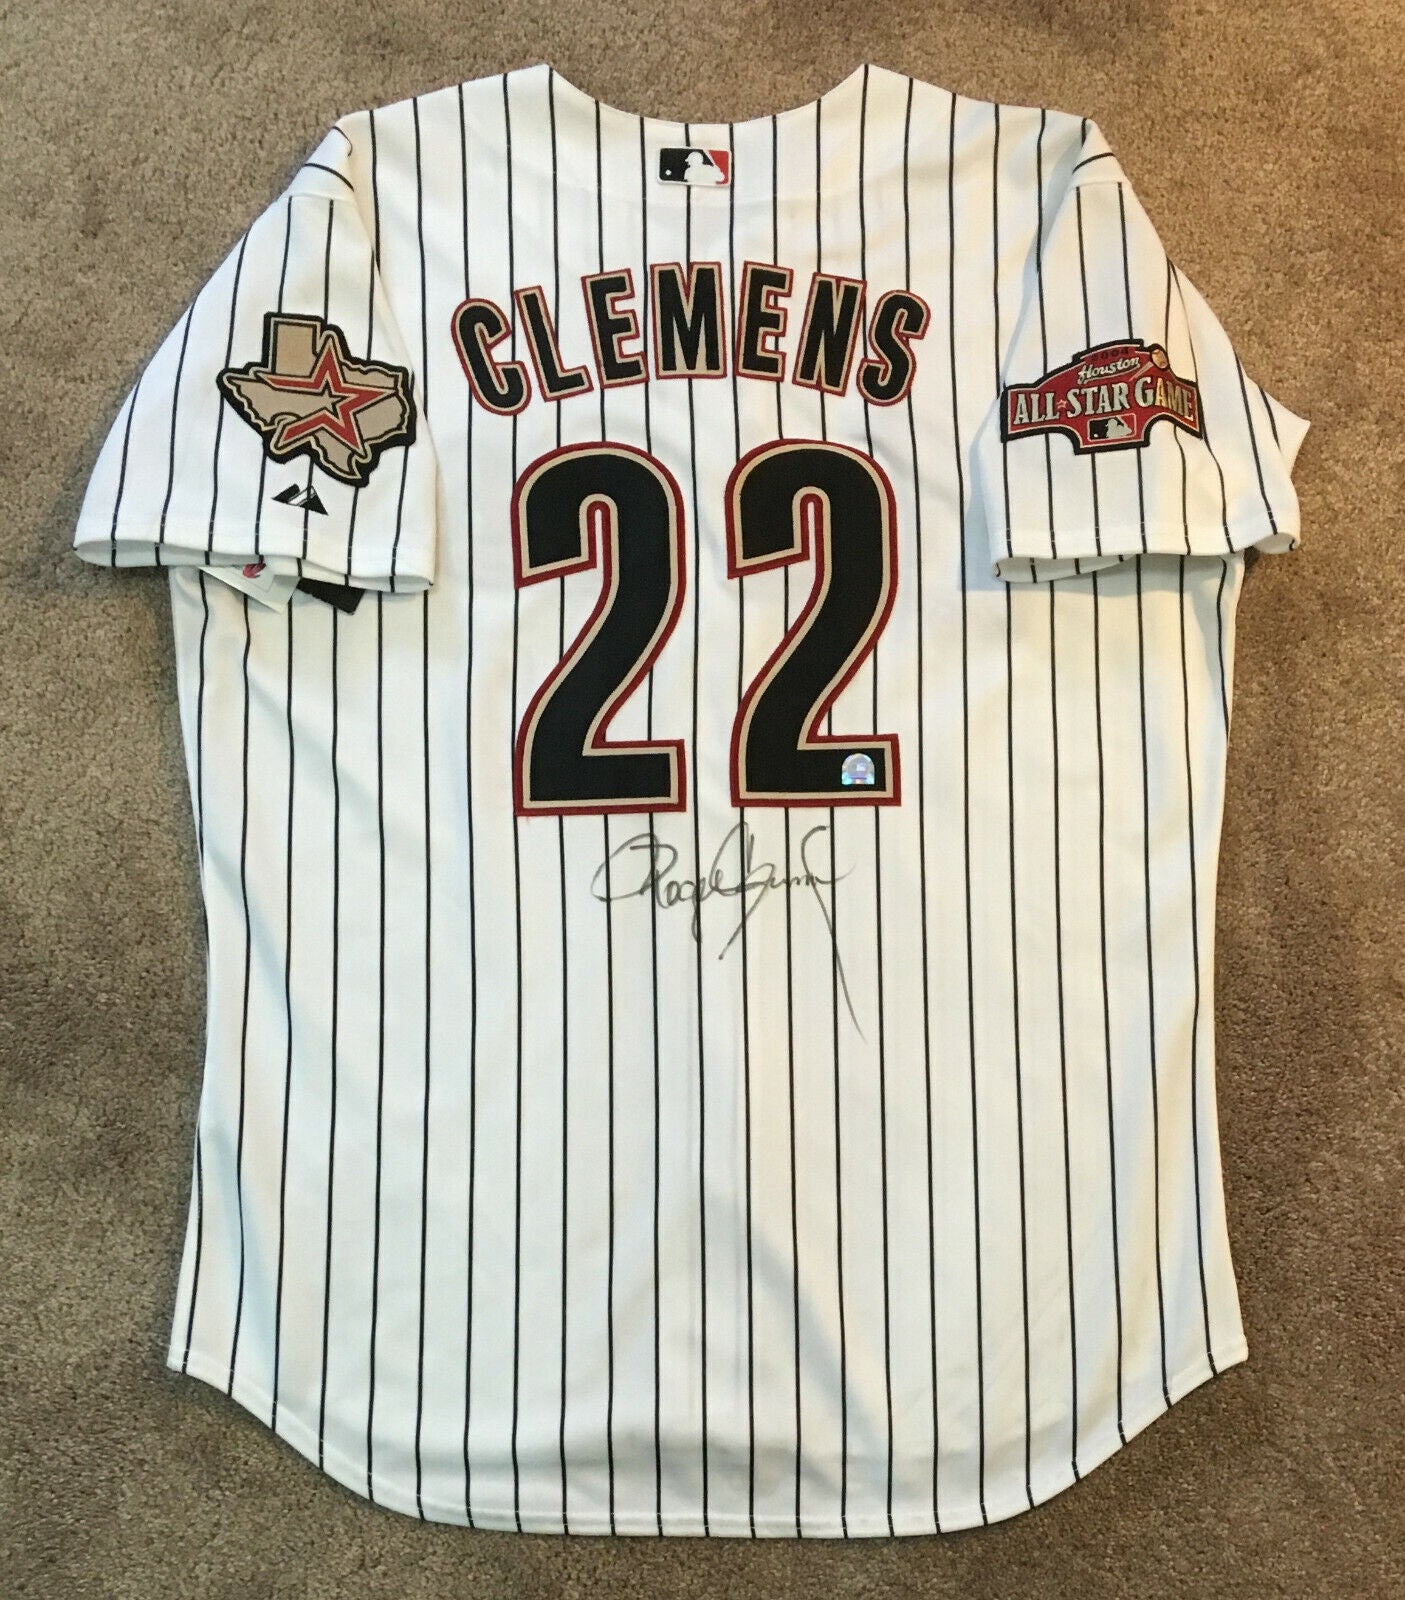 Roger Clemens signed Authentic 2004 Astros All Star Jersey